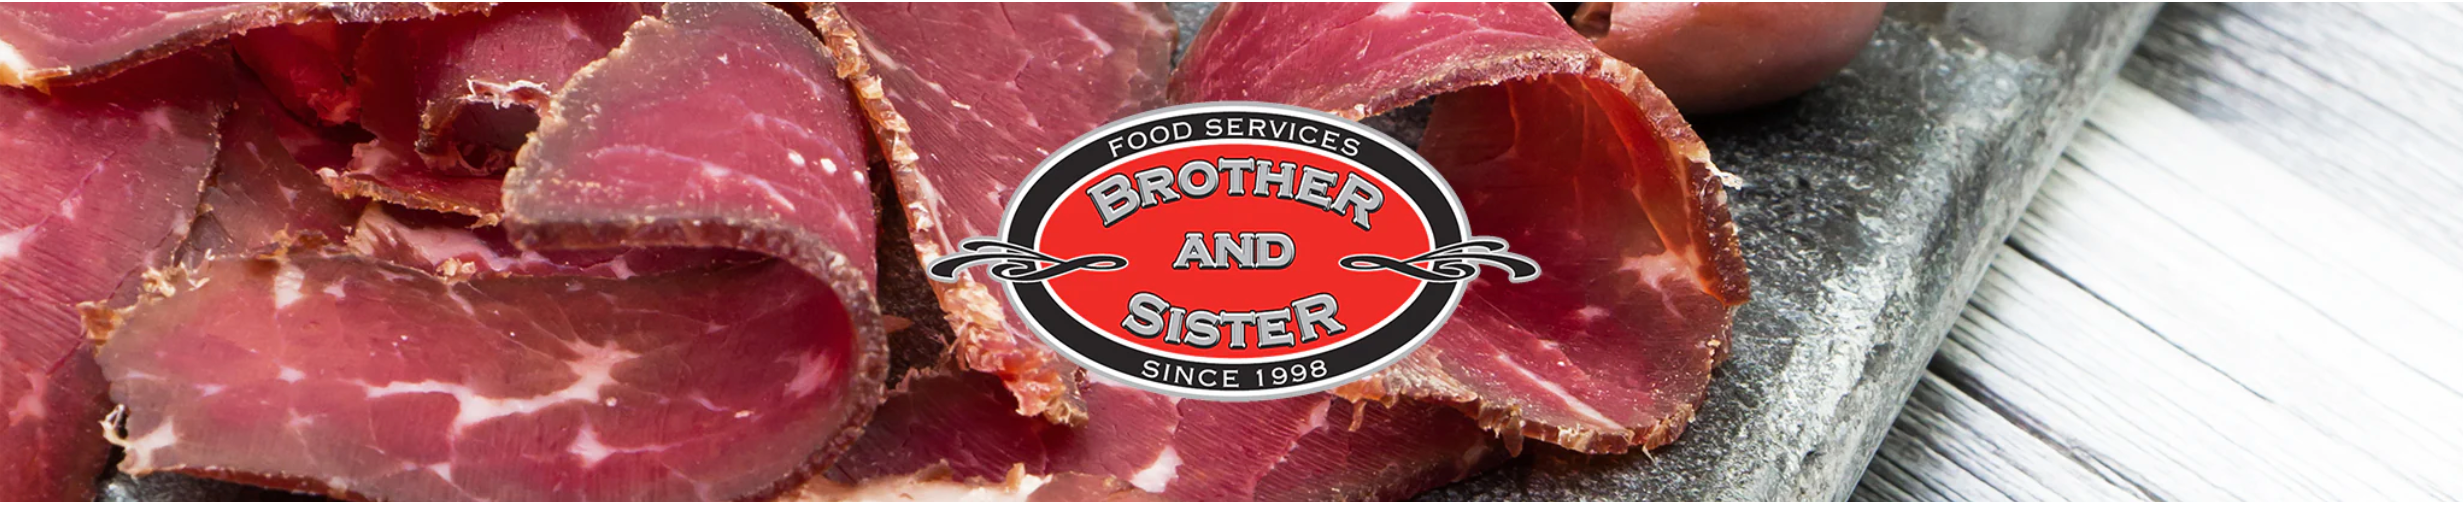 Brother & Sister Smoked Meats, Brother and Sister Meats, Suho Meso - Global Imports & Exports - Wholesale European Food Distributors